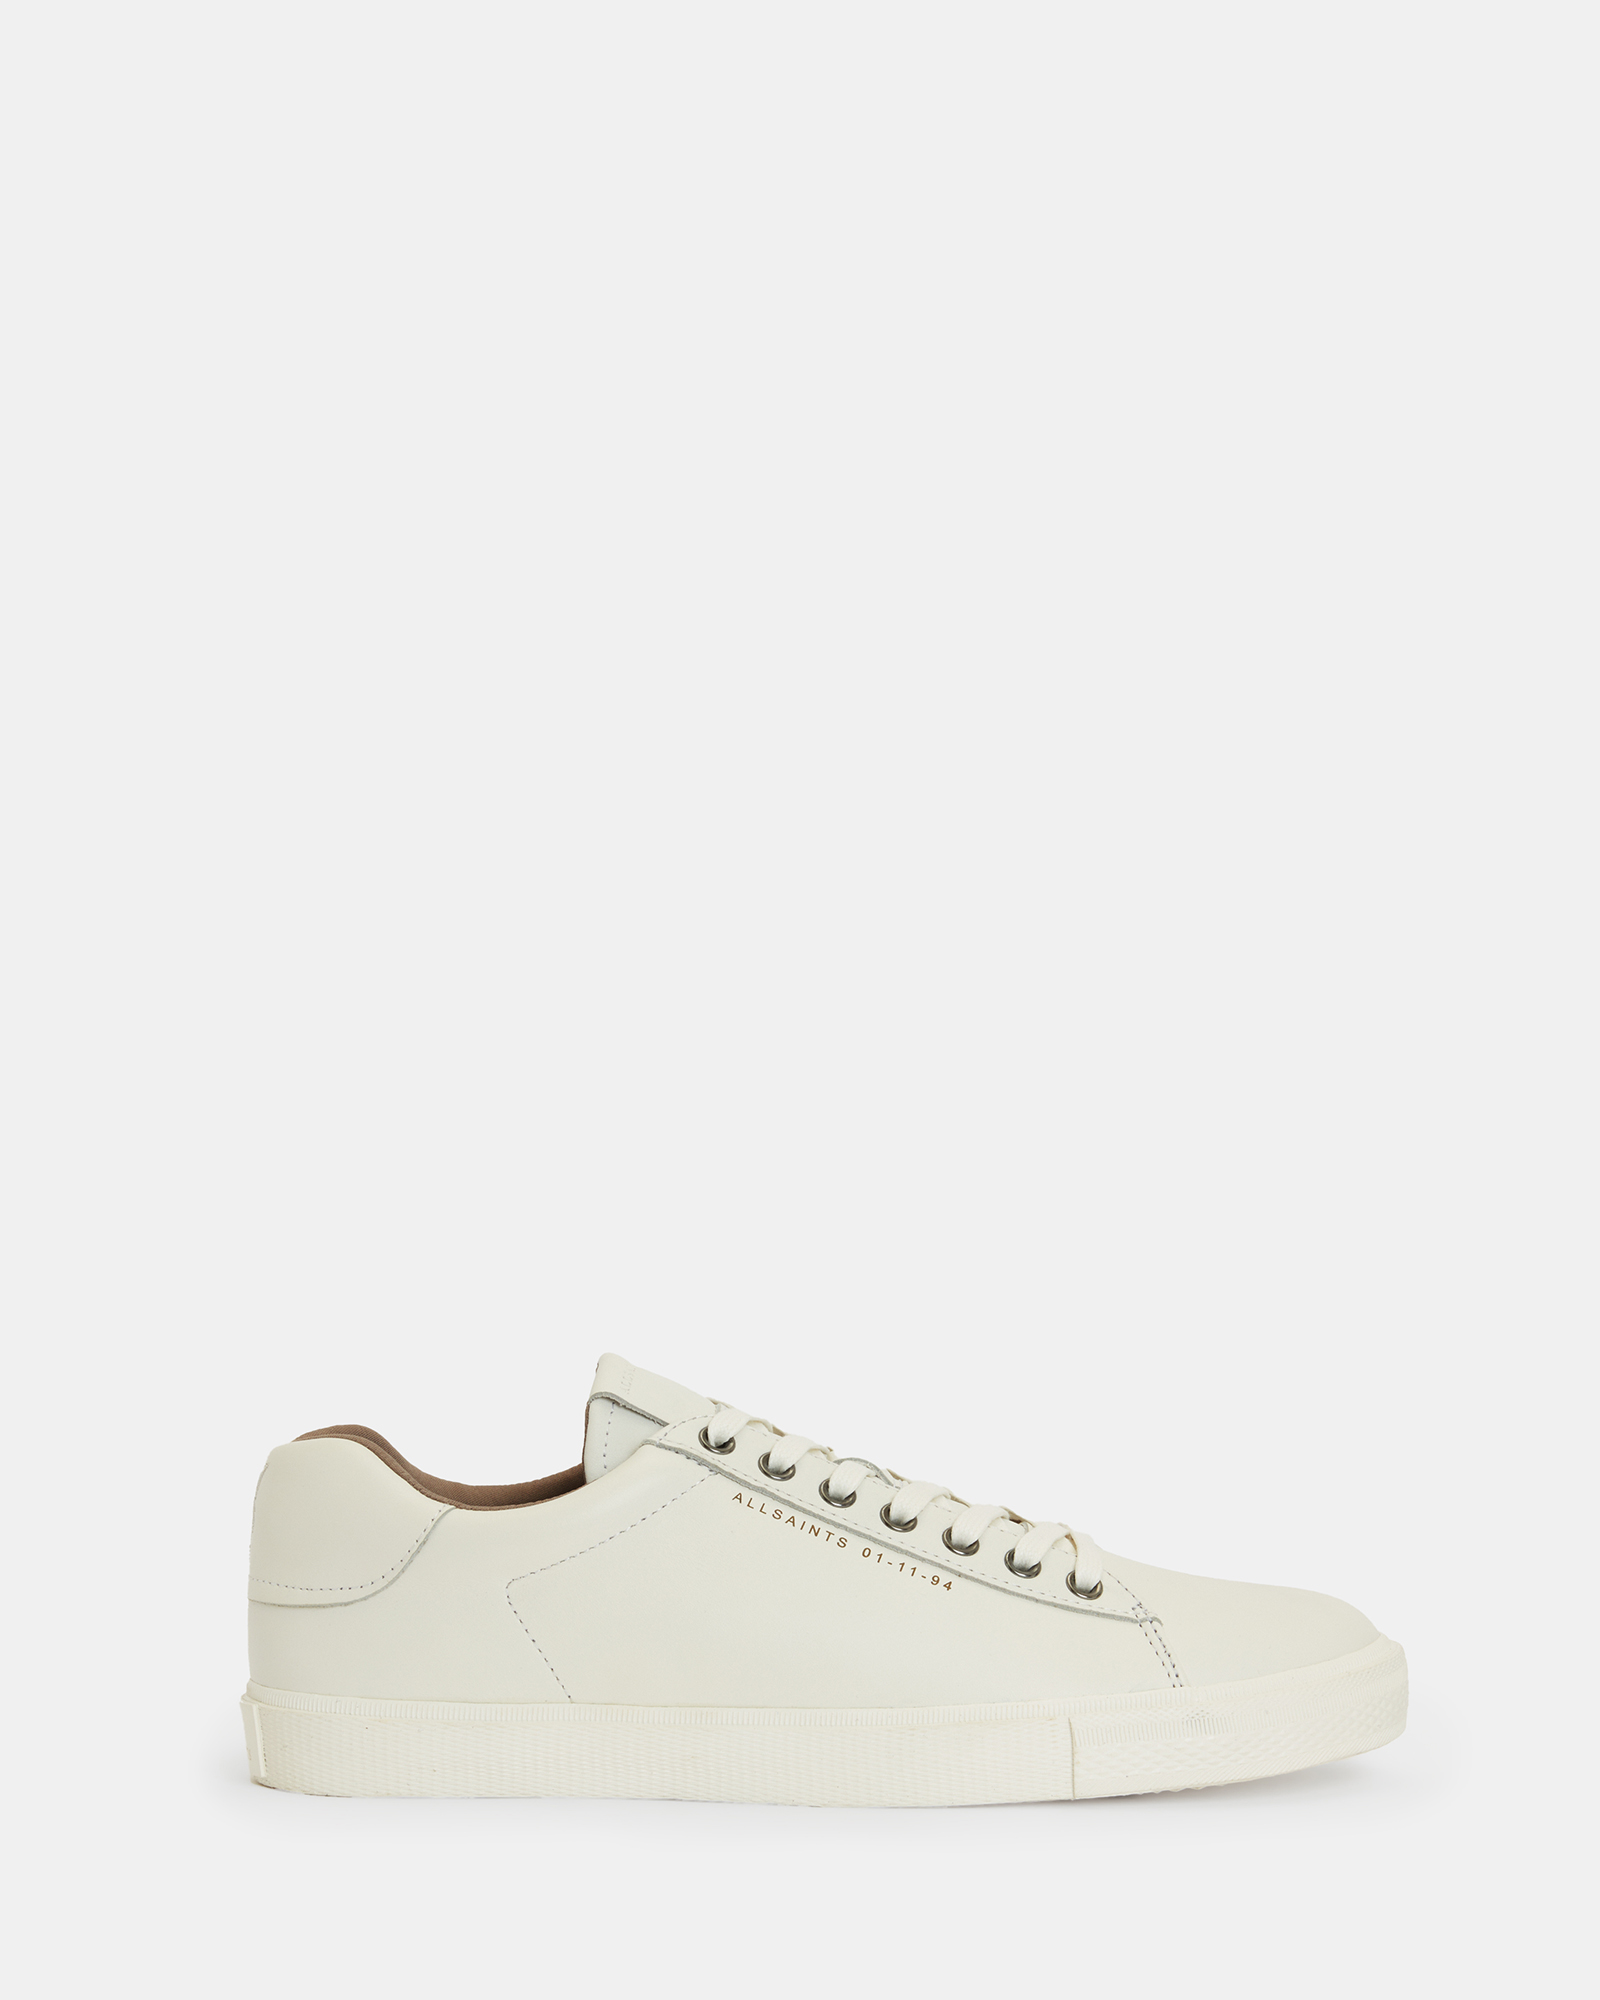 AllSaints Brody Leather Low Top Sneakers